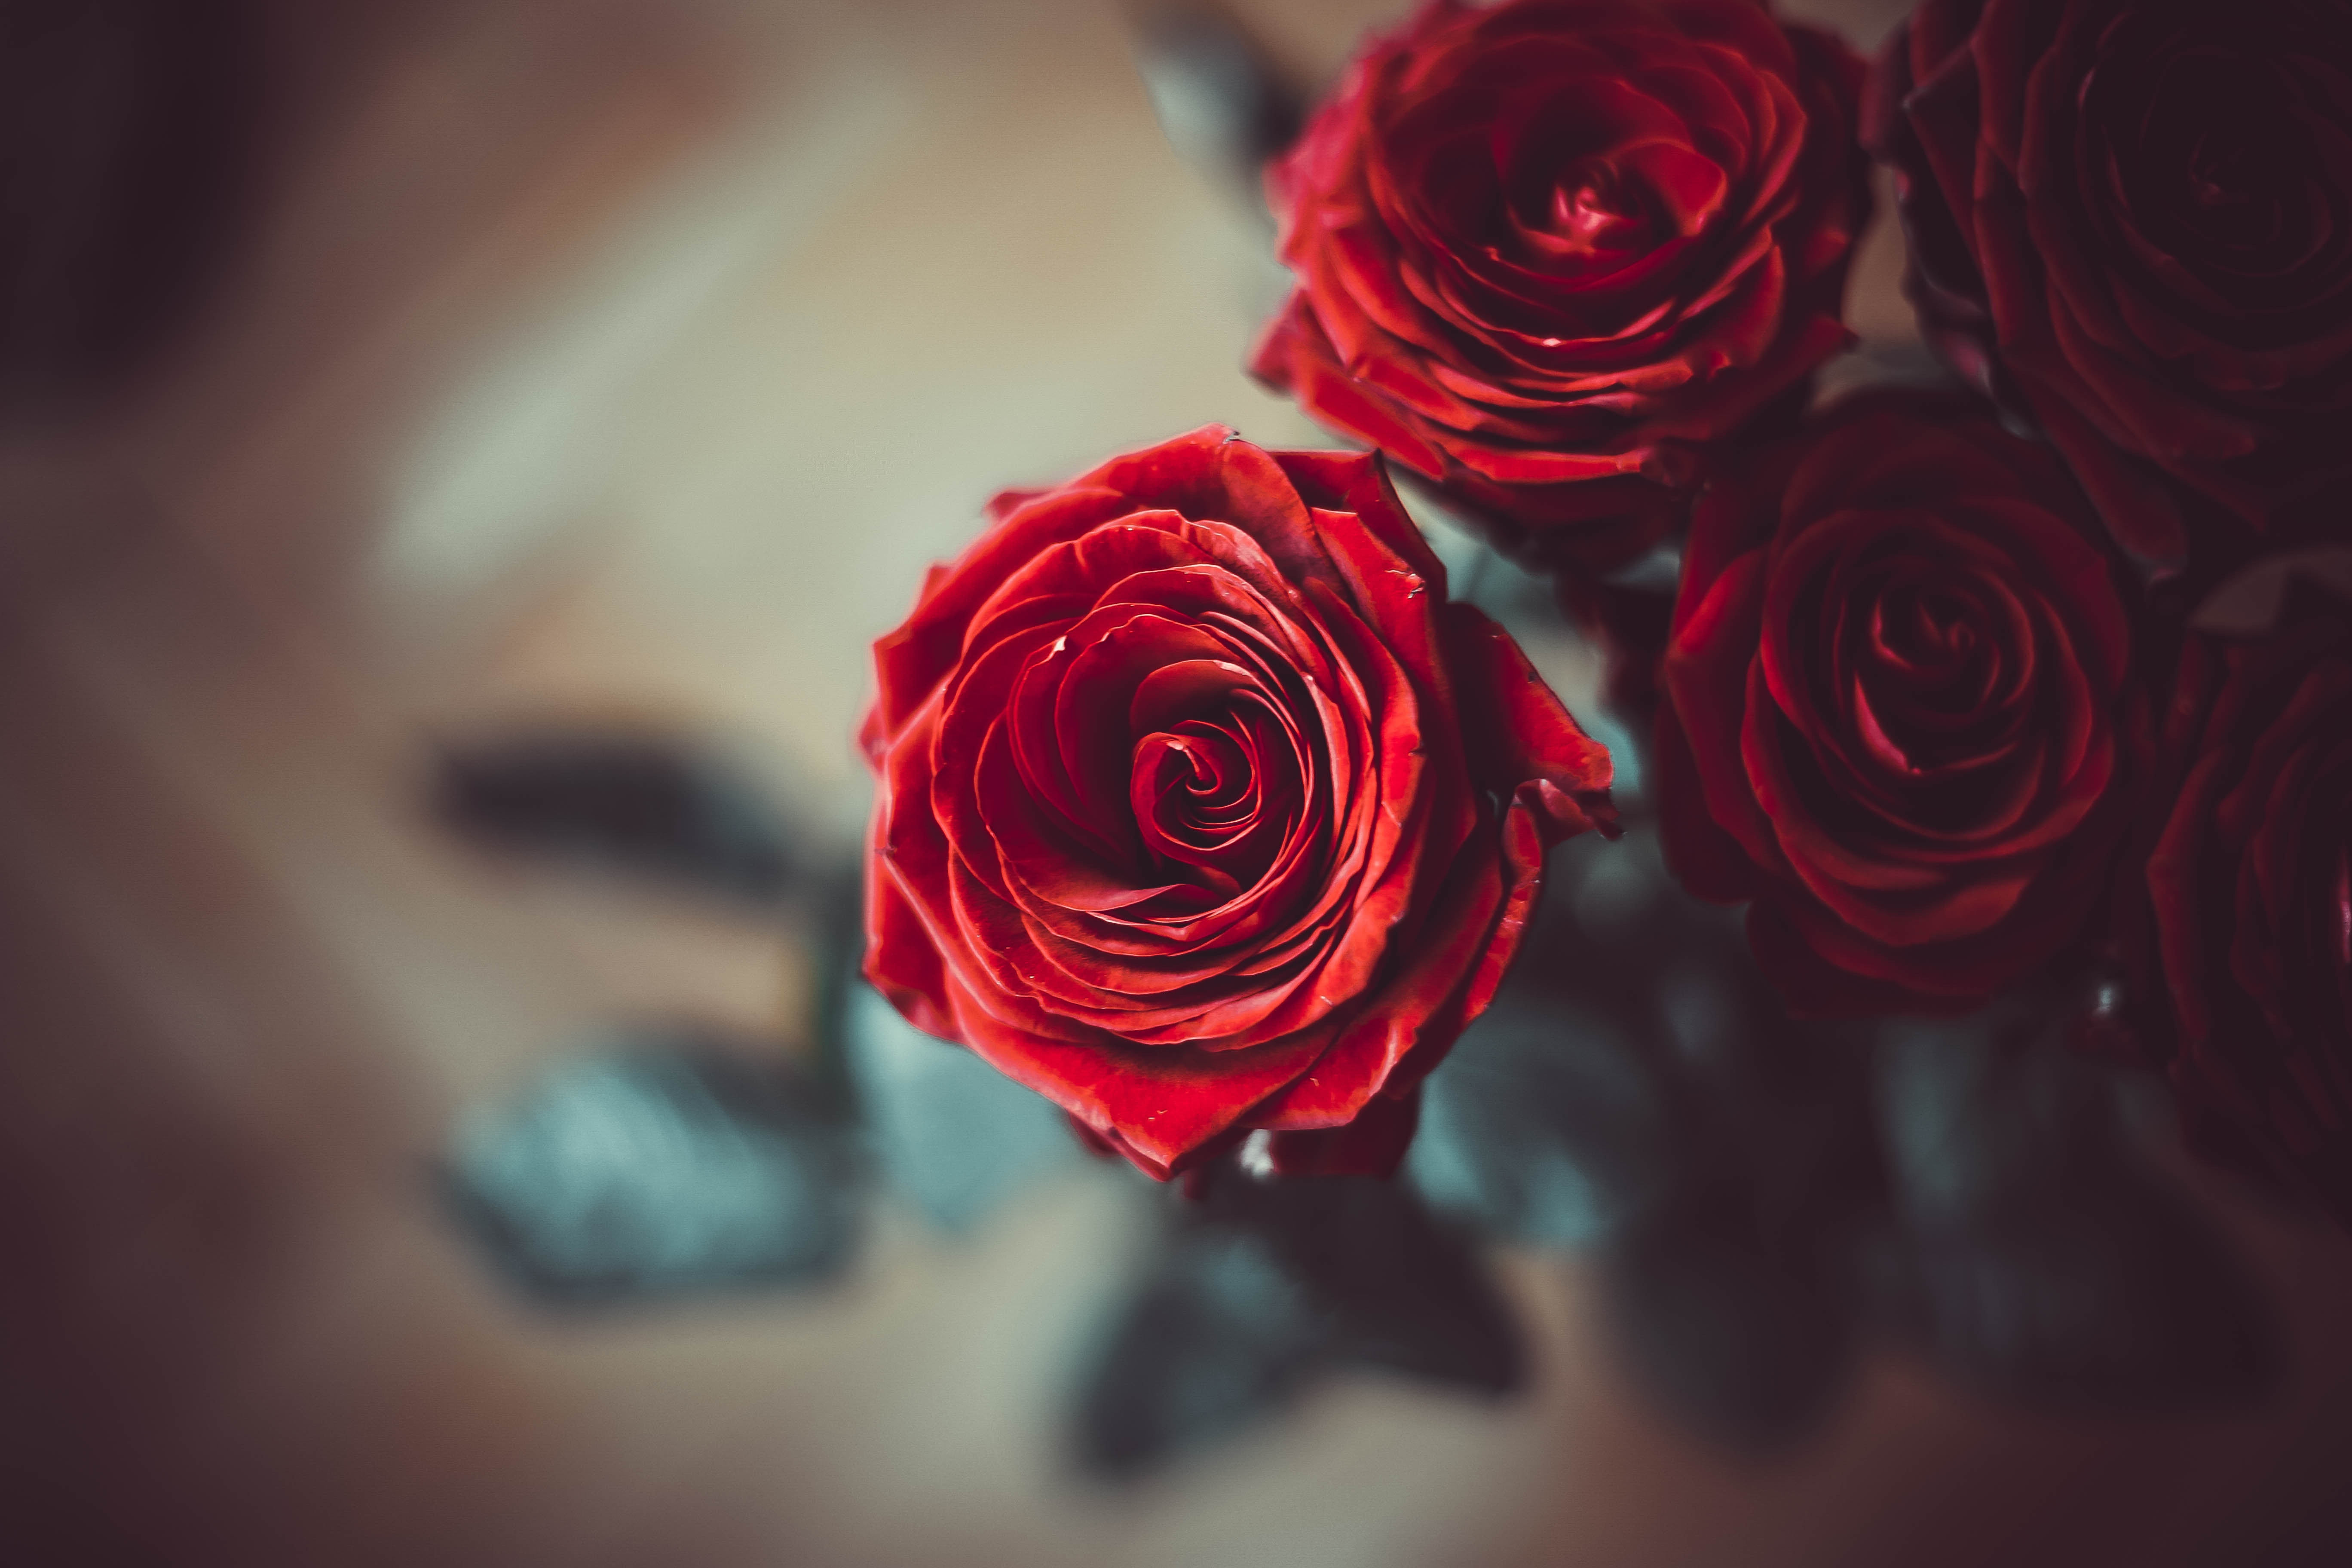 130524 download wallpaper rose flower, flowers, red, flower, rose, petals, bud, blur, smooth screensavers and pictures for free